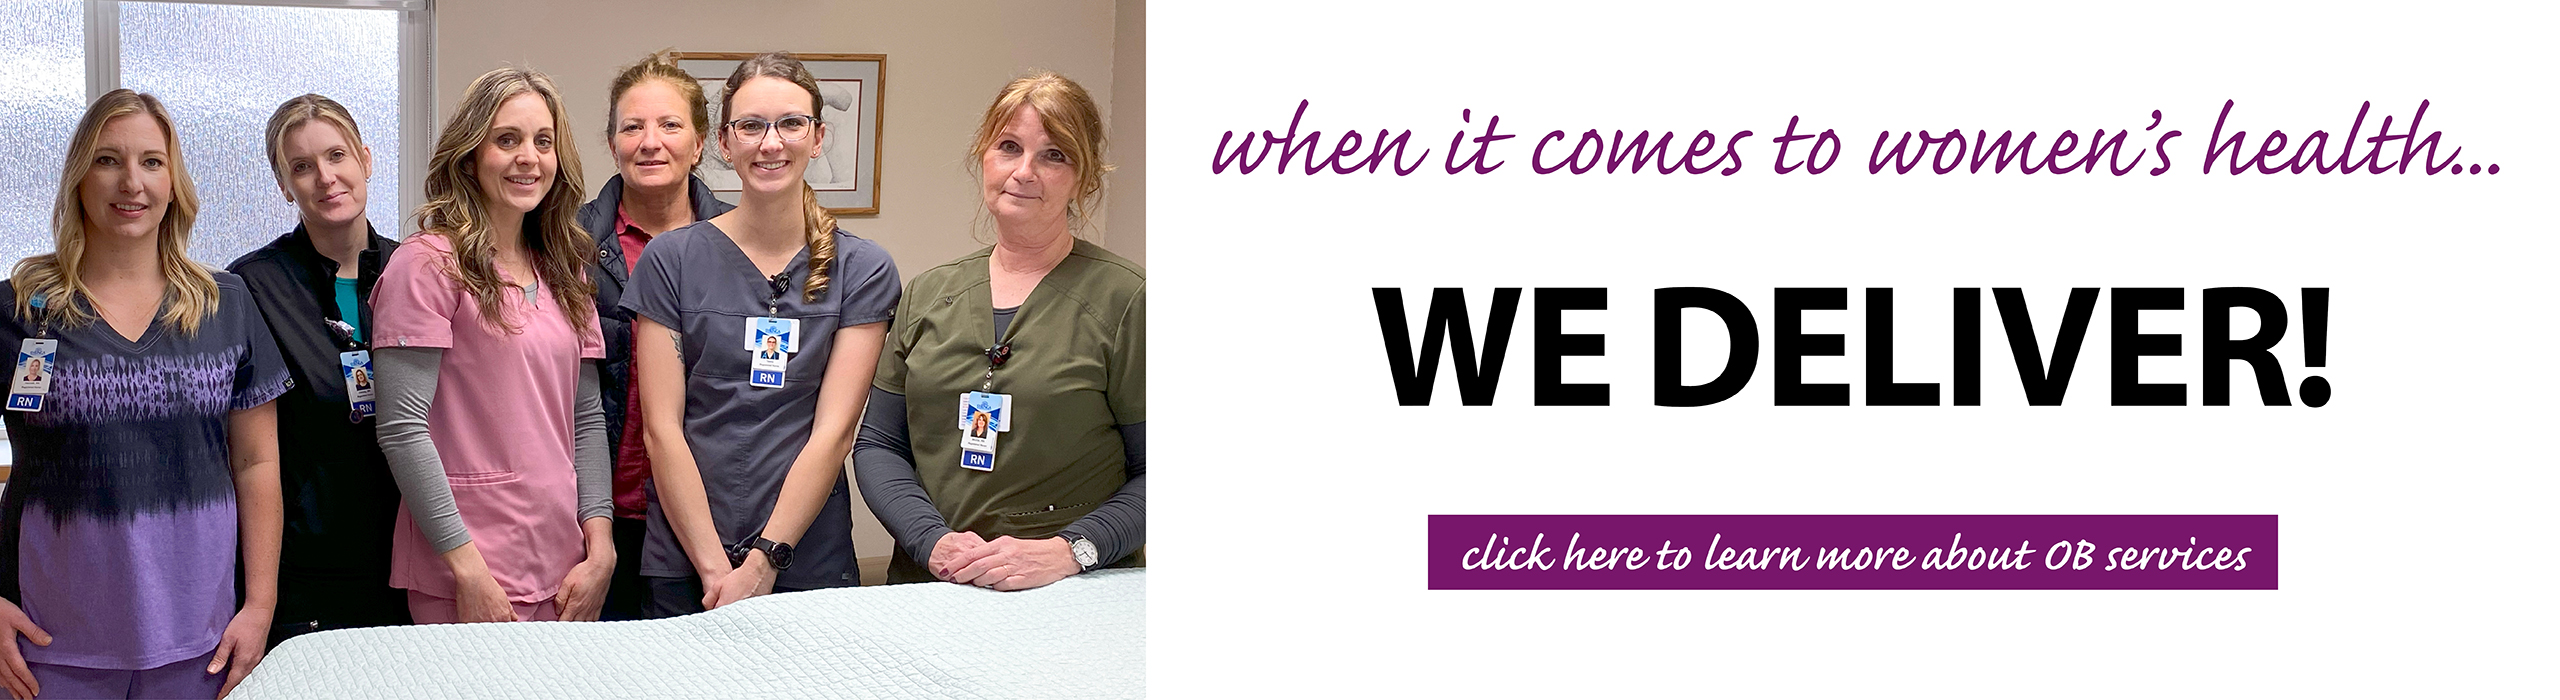 Pictured: OB nurses standing in a labor and delivery room at Syringa Hospital. 

Text reads: when it comes to women's health WE DELIVER
click here to learn more about OB services